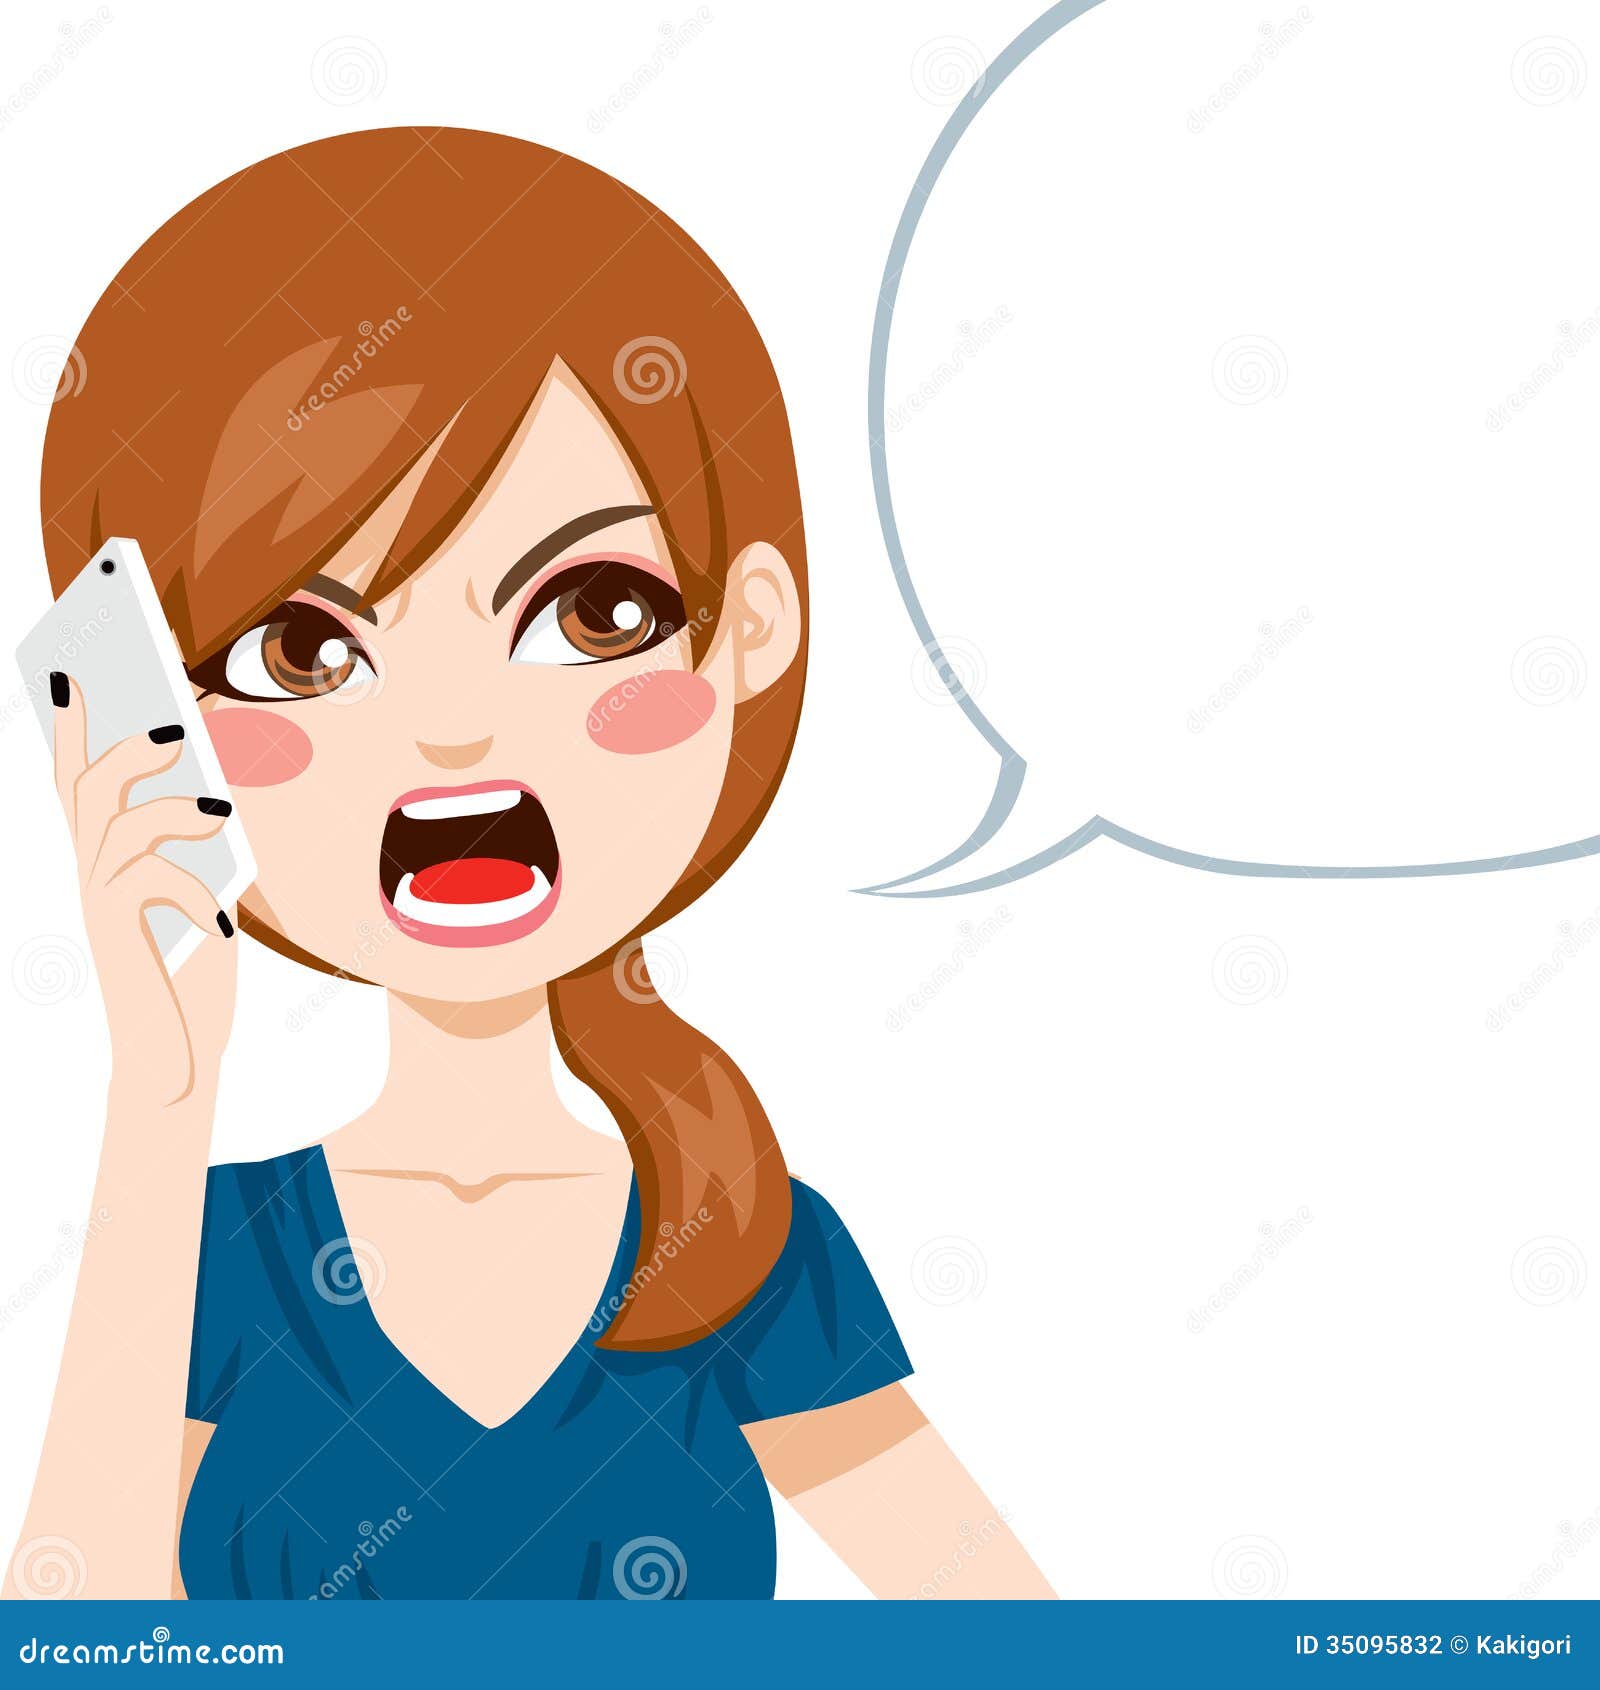 woman on phone clipart - photo #50